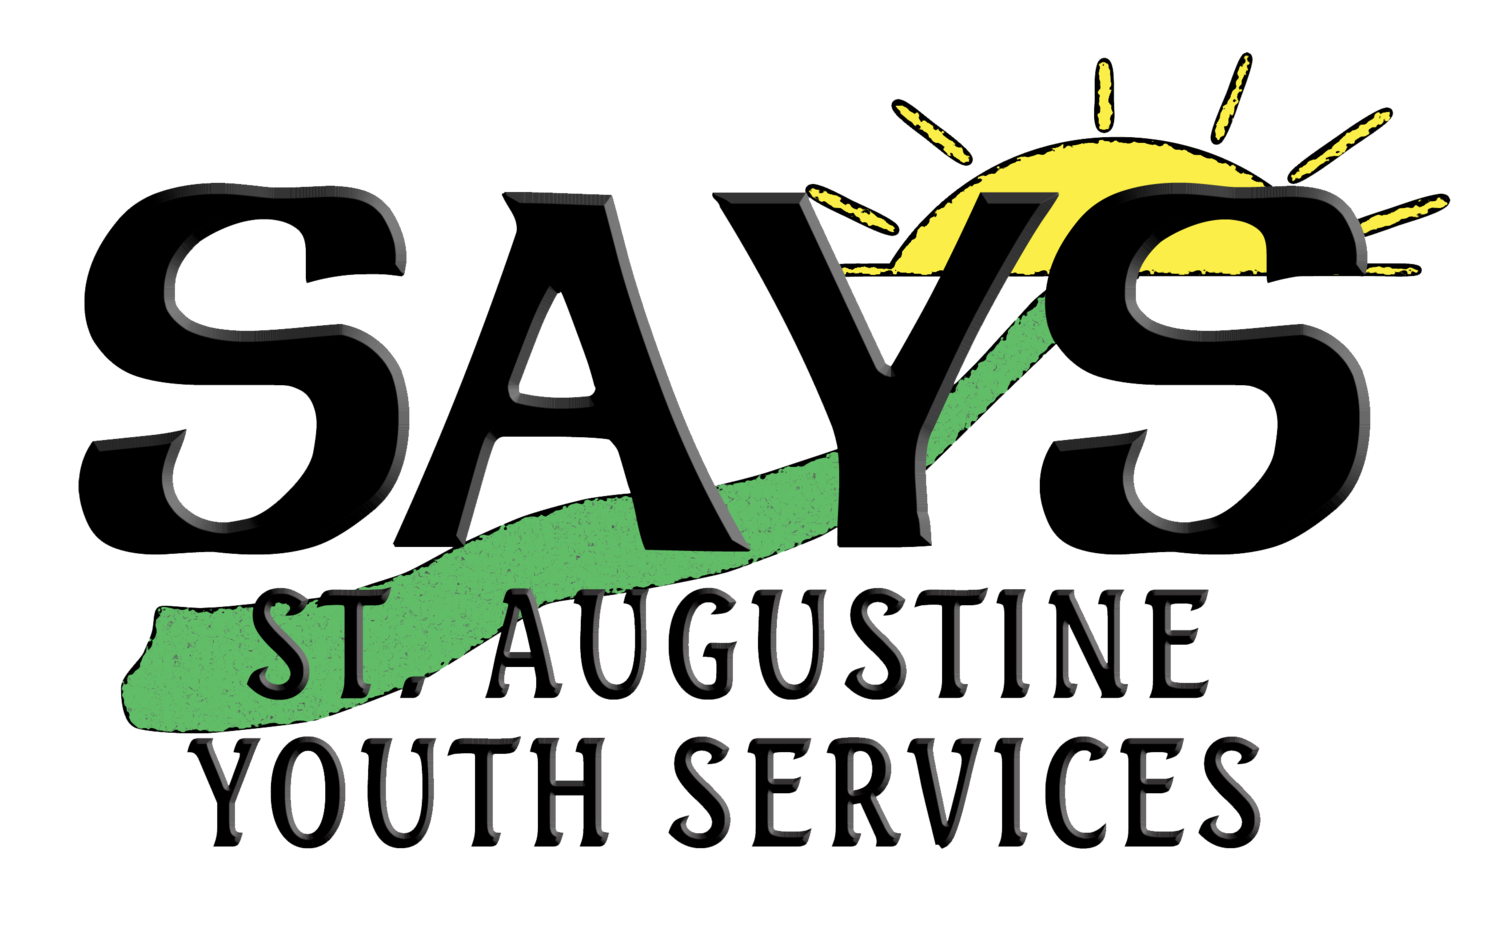 St. Augustine Youth Services logo